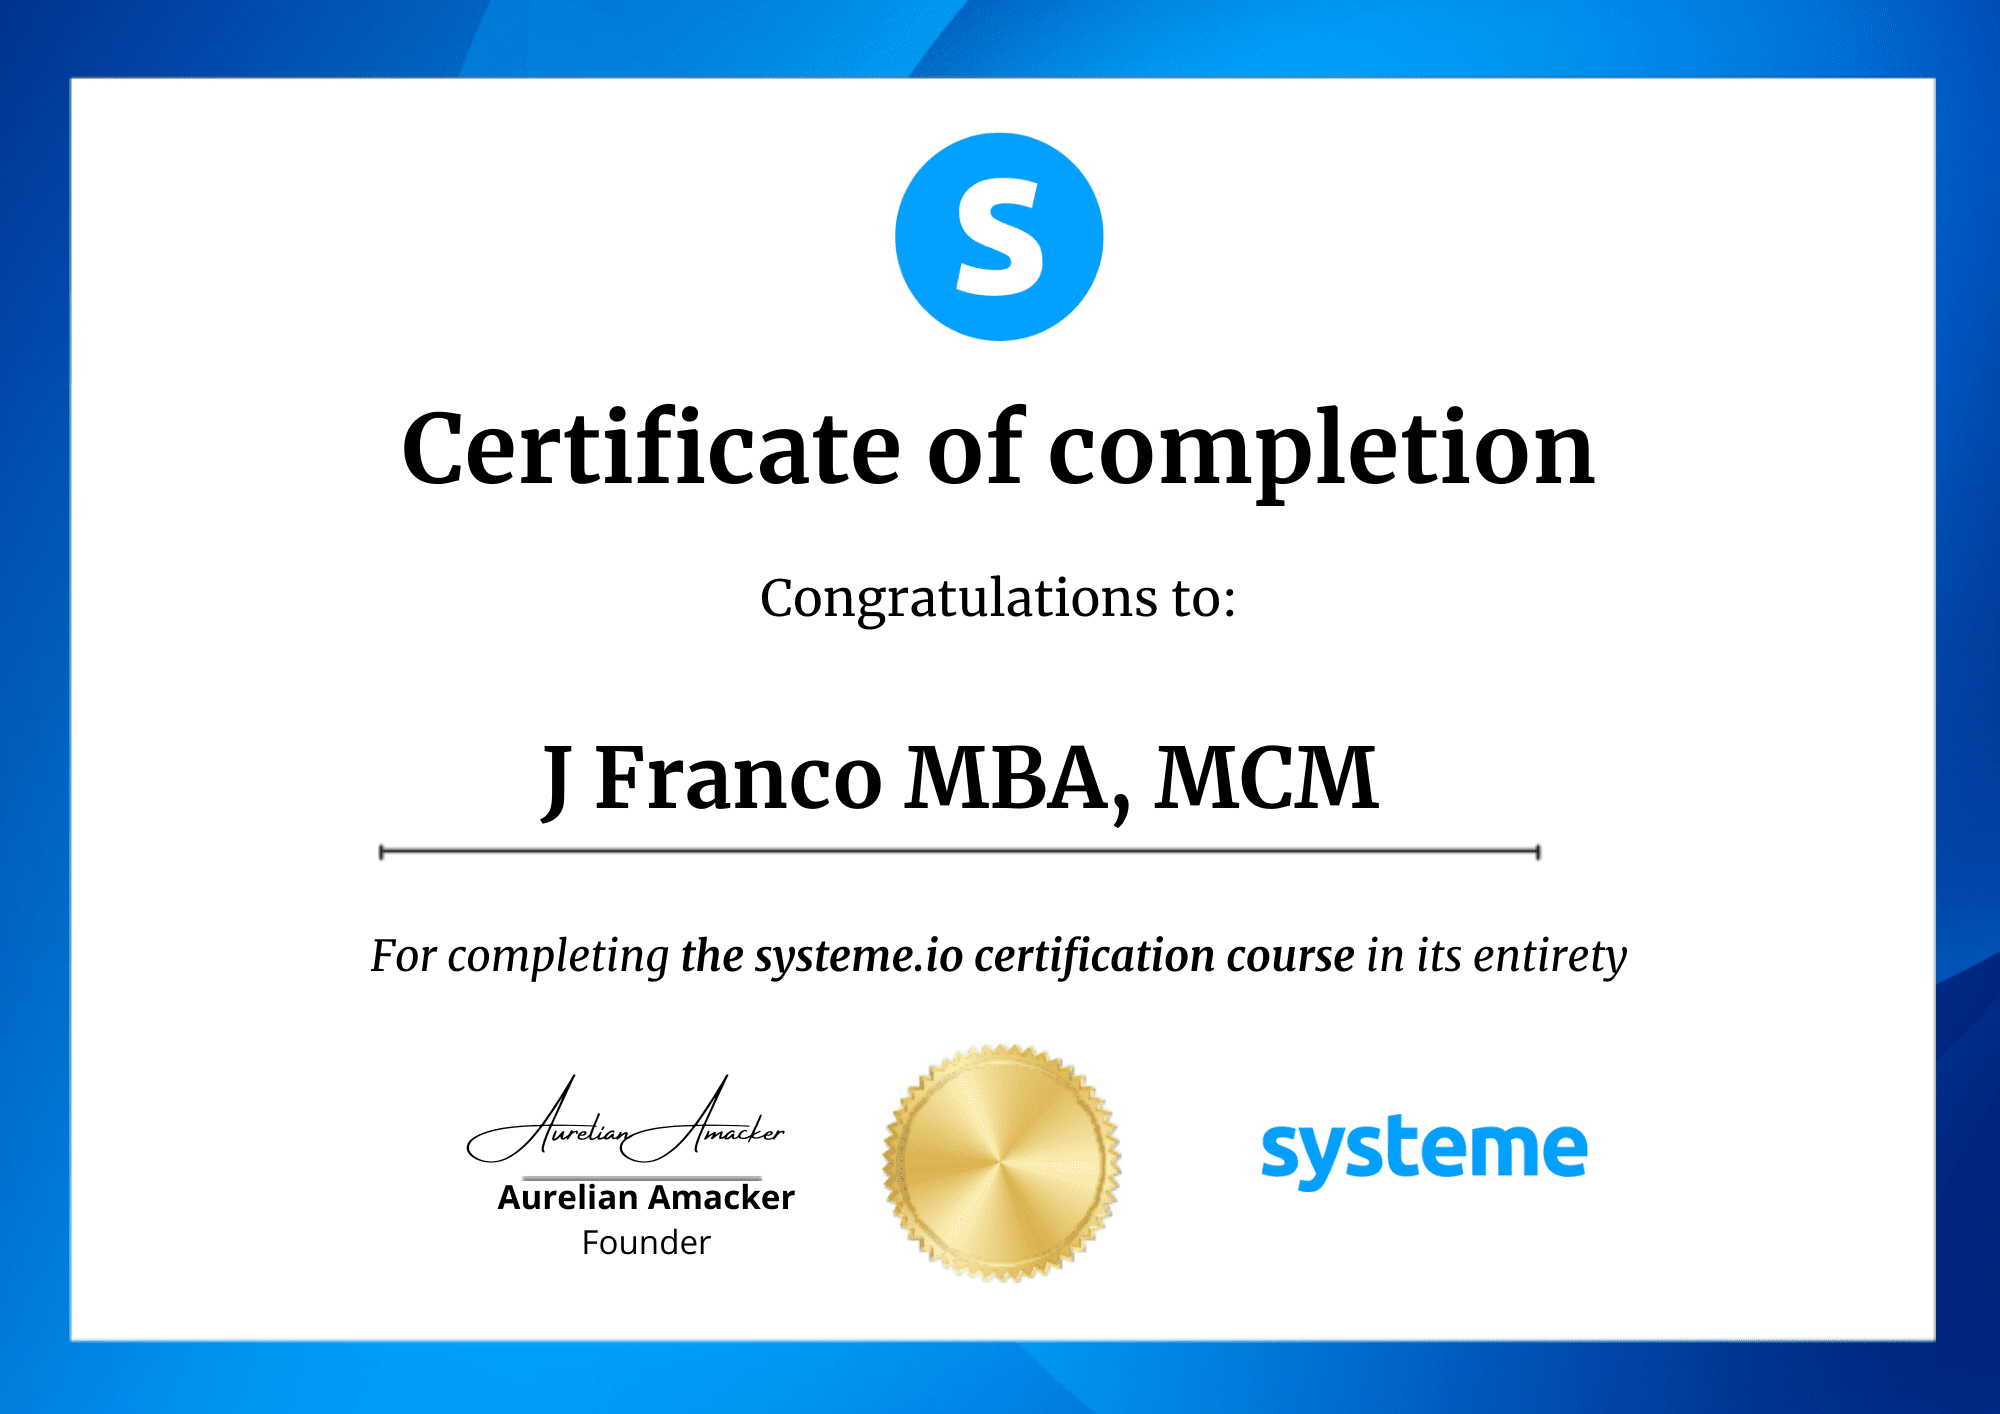 J Franco MBA MCM Certified Systeme.io